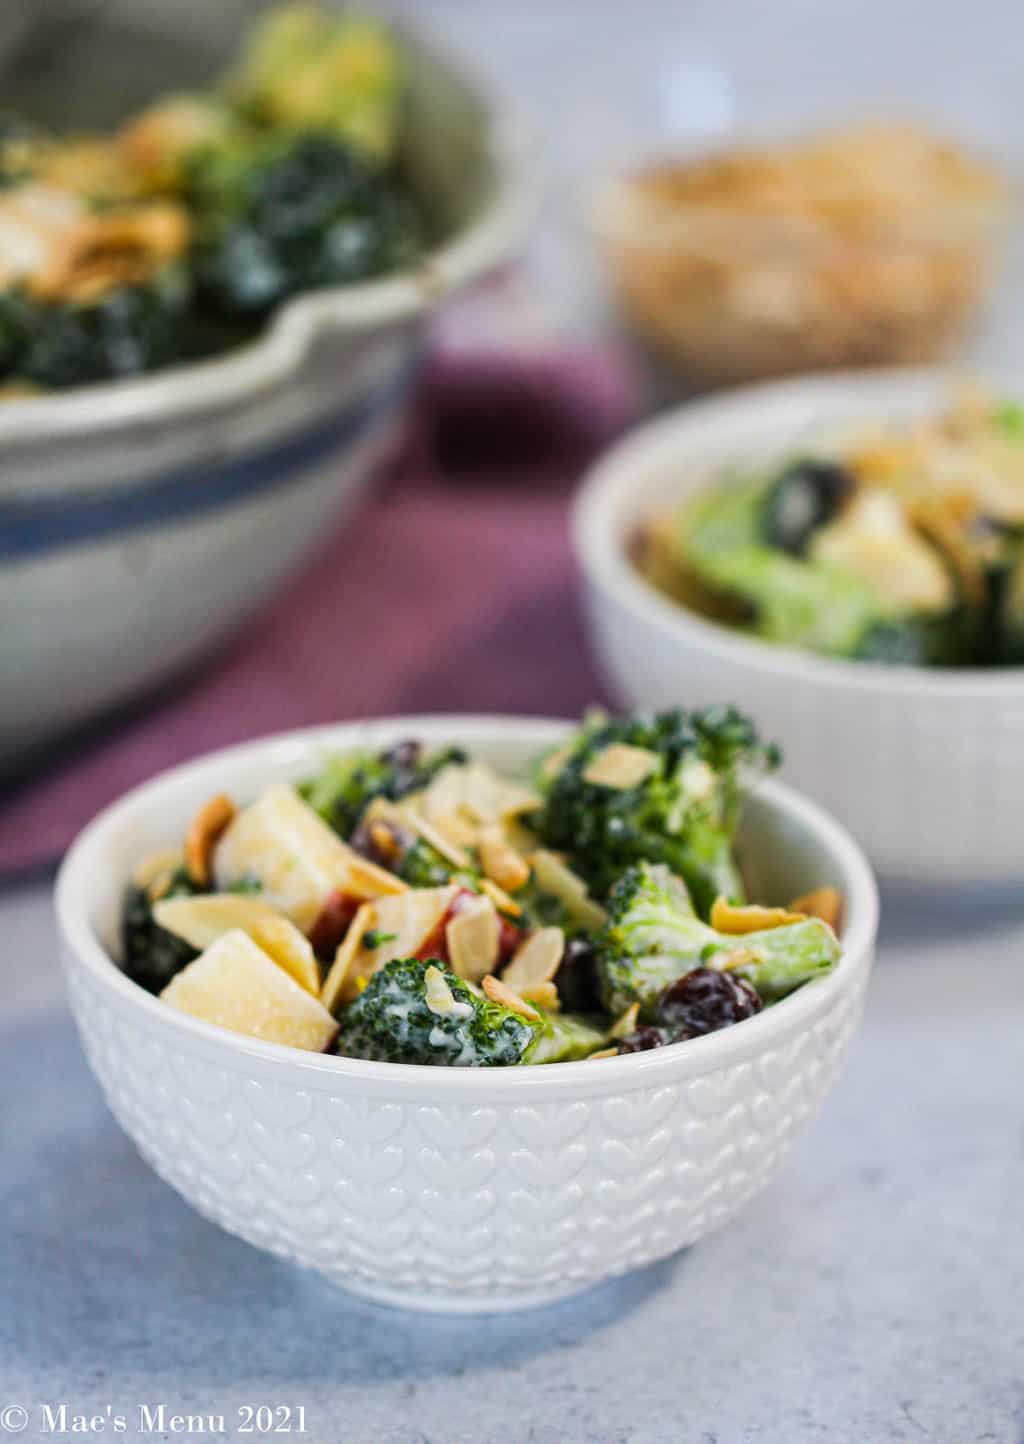 A shot of a small bowl of broccoli salad in front of others and a bowl of the salad